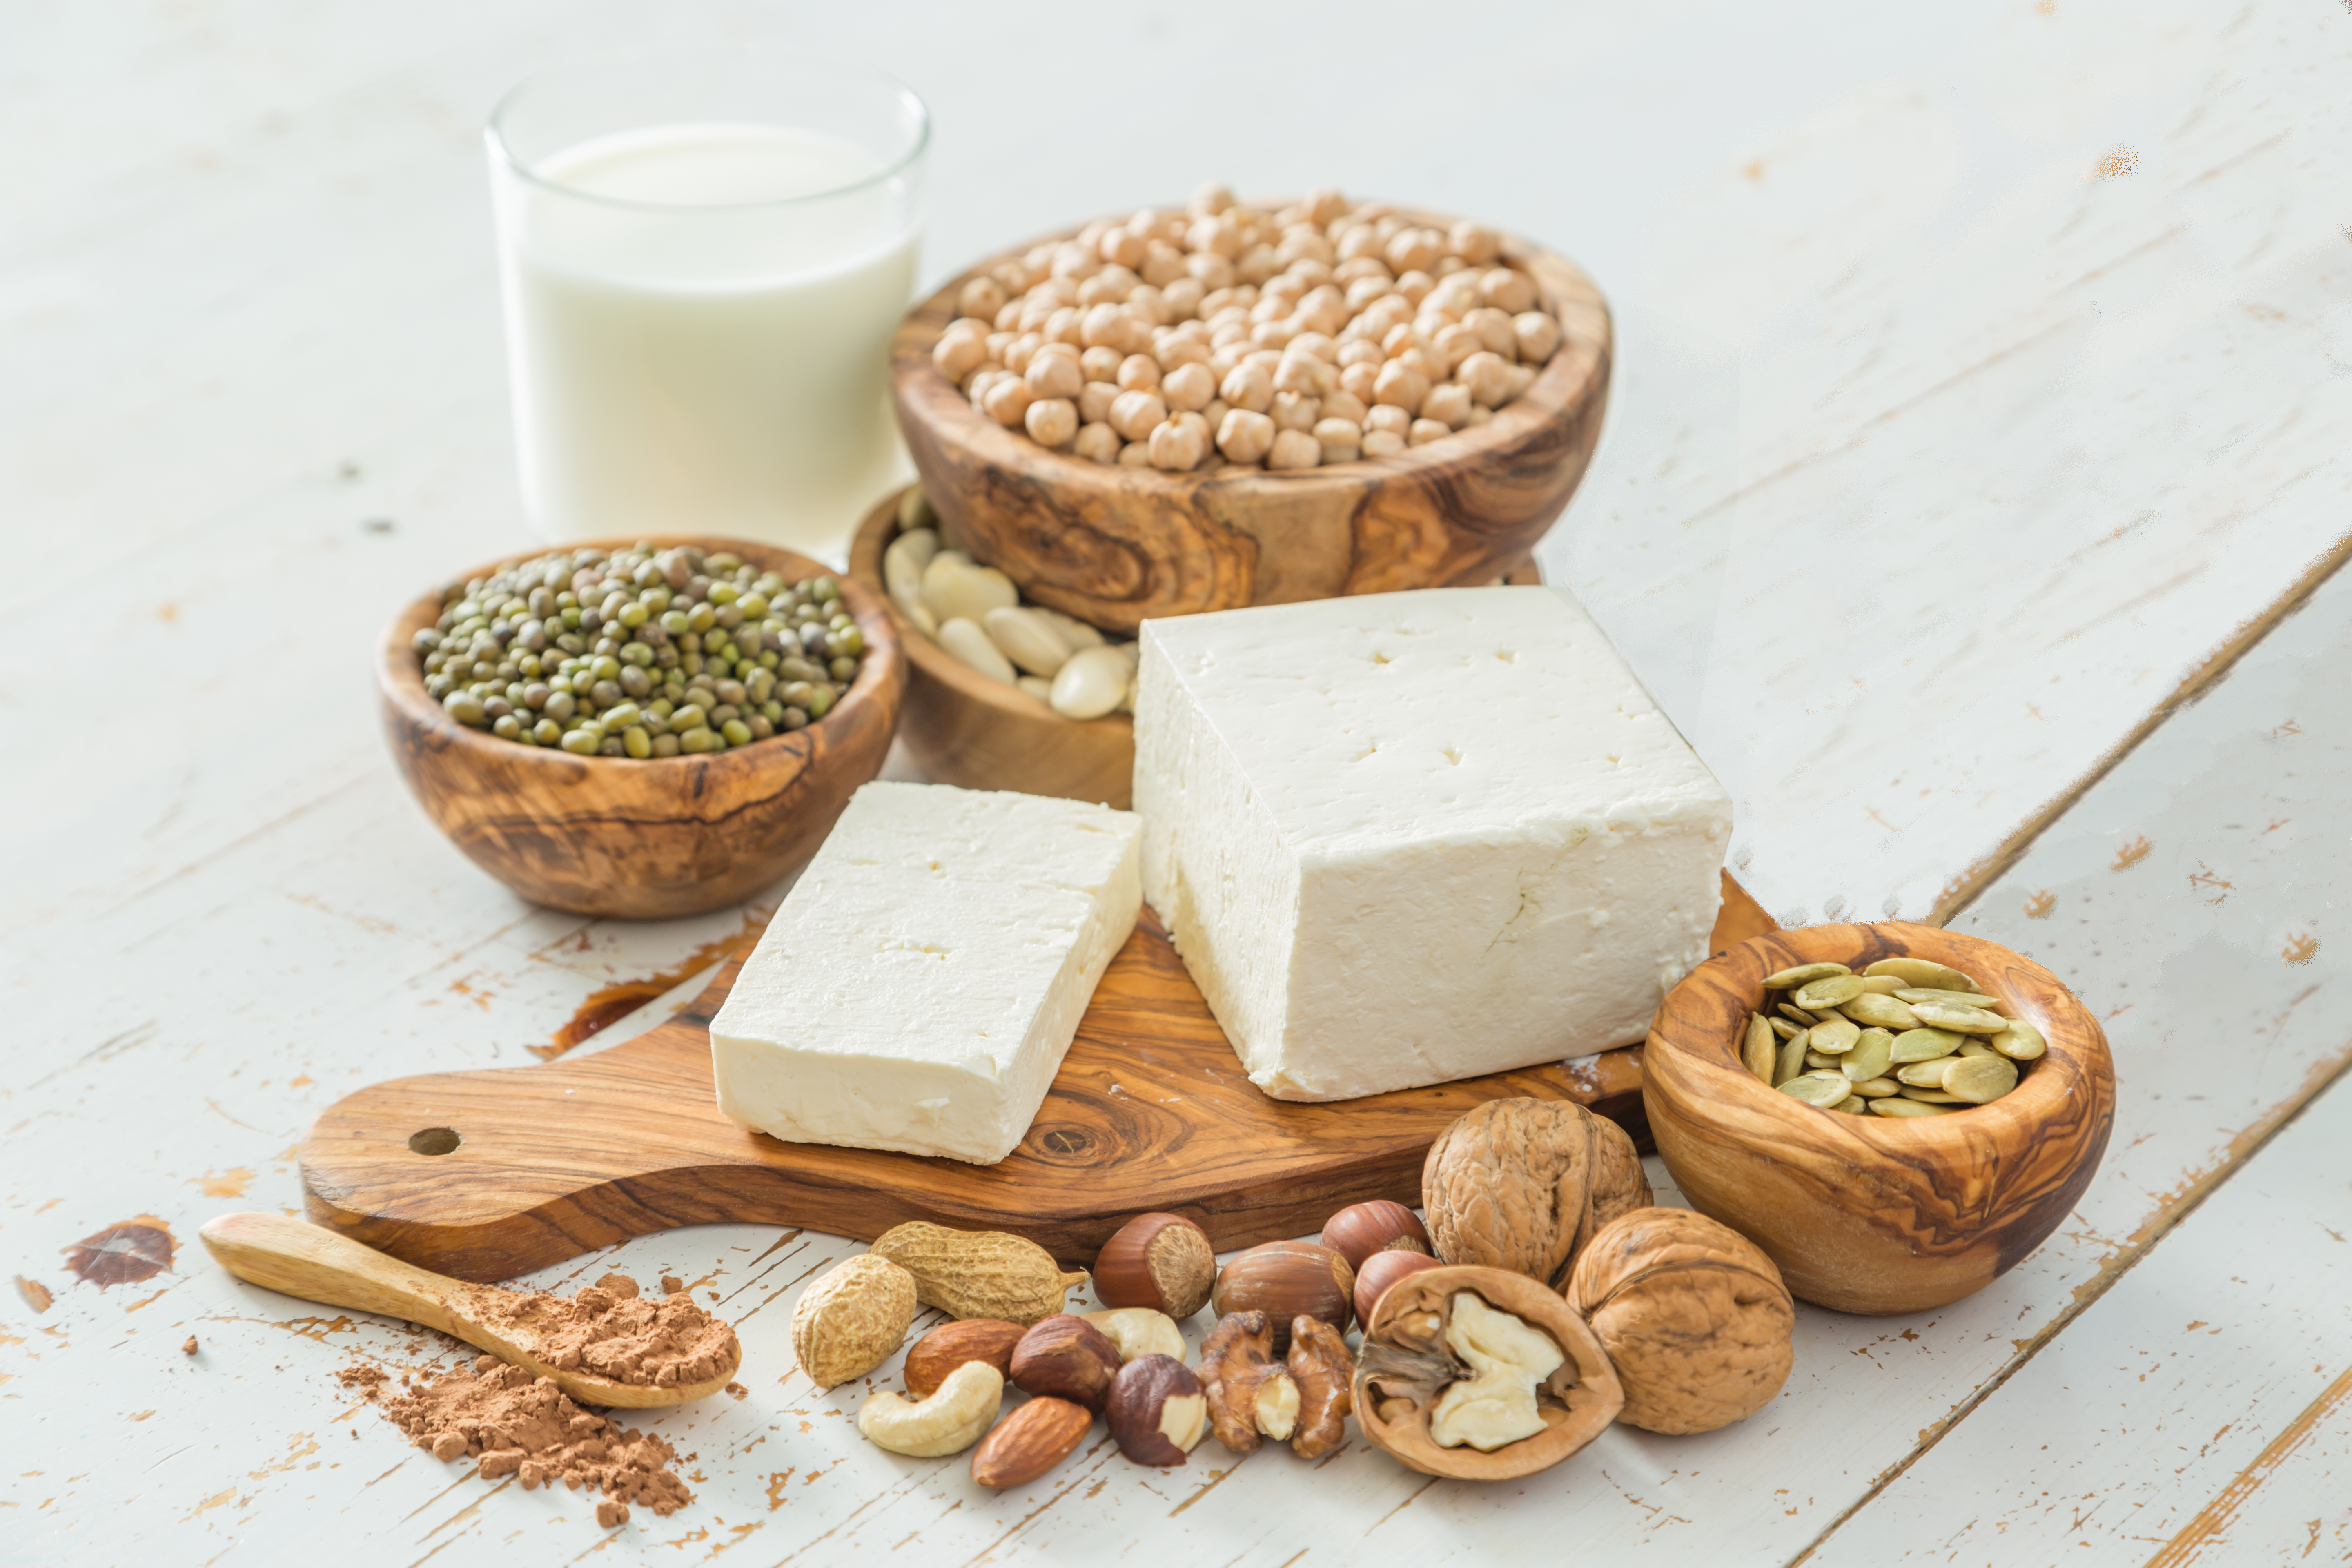 Plant-based protein: tofu, nuts, beans, lentils and low-fat milk